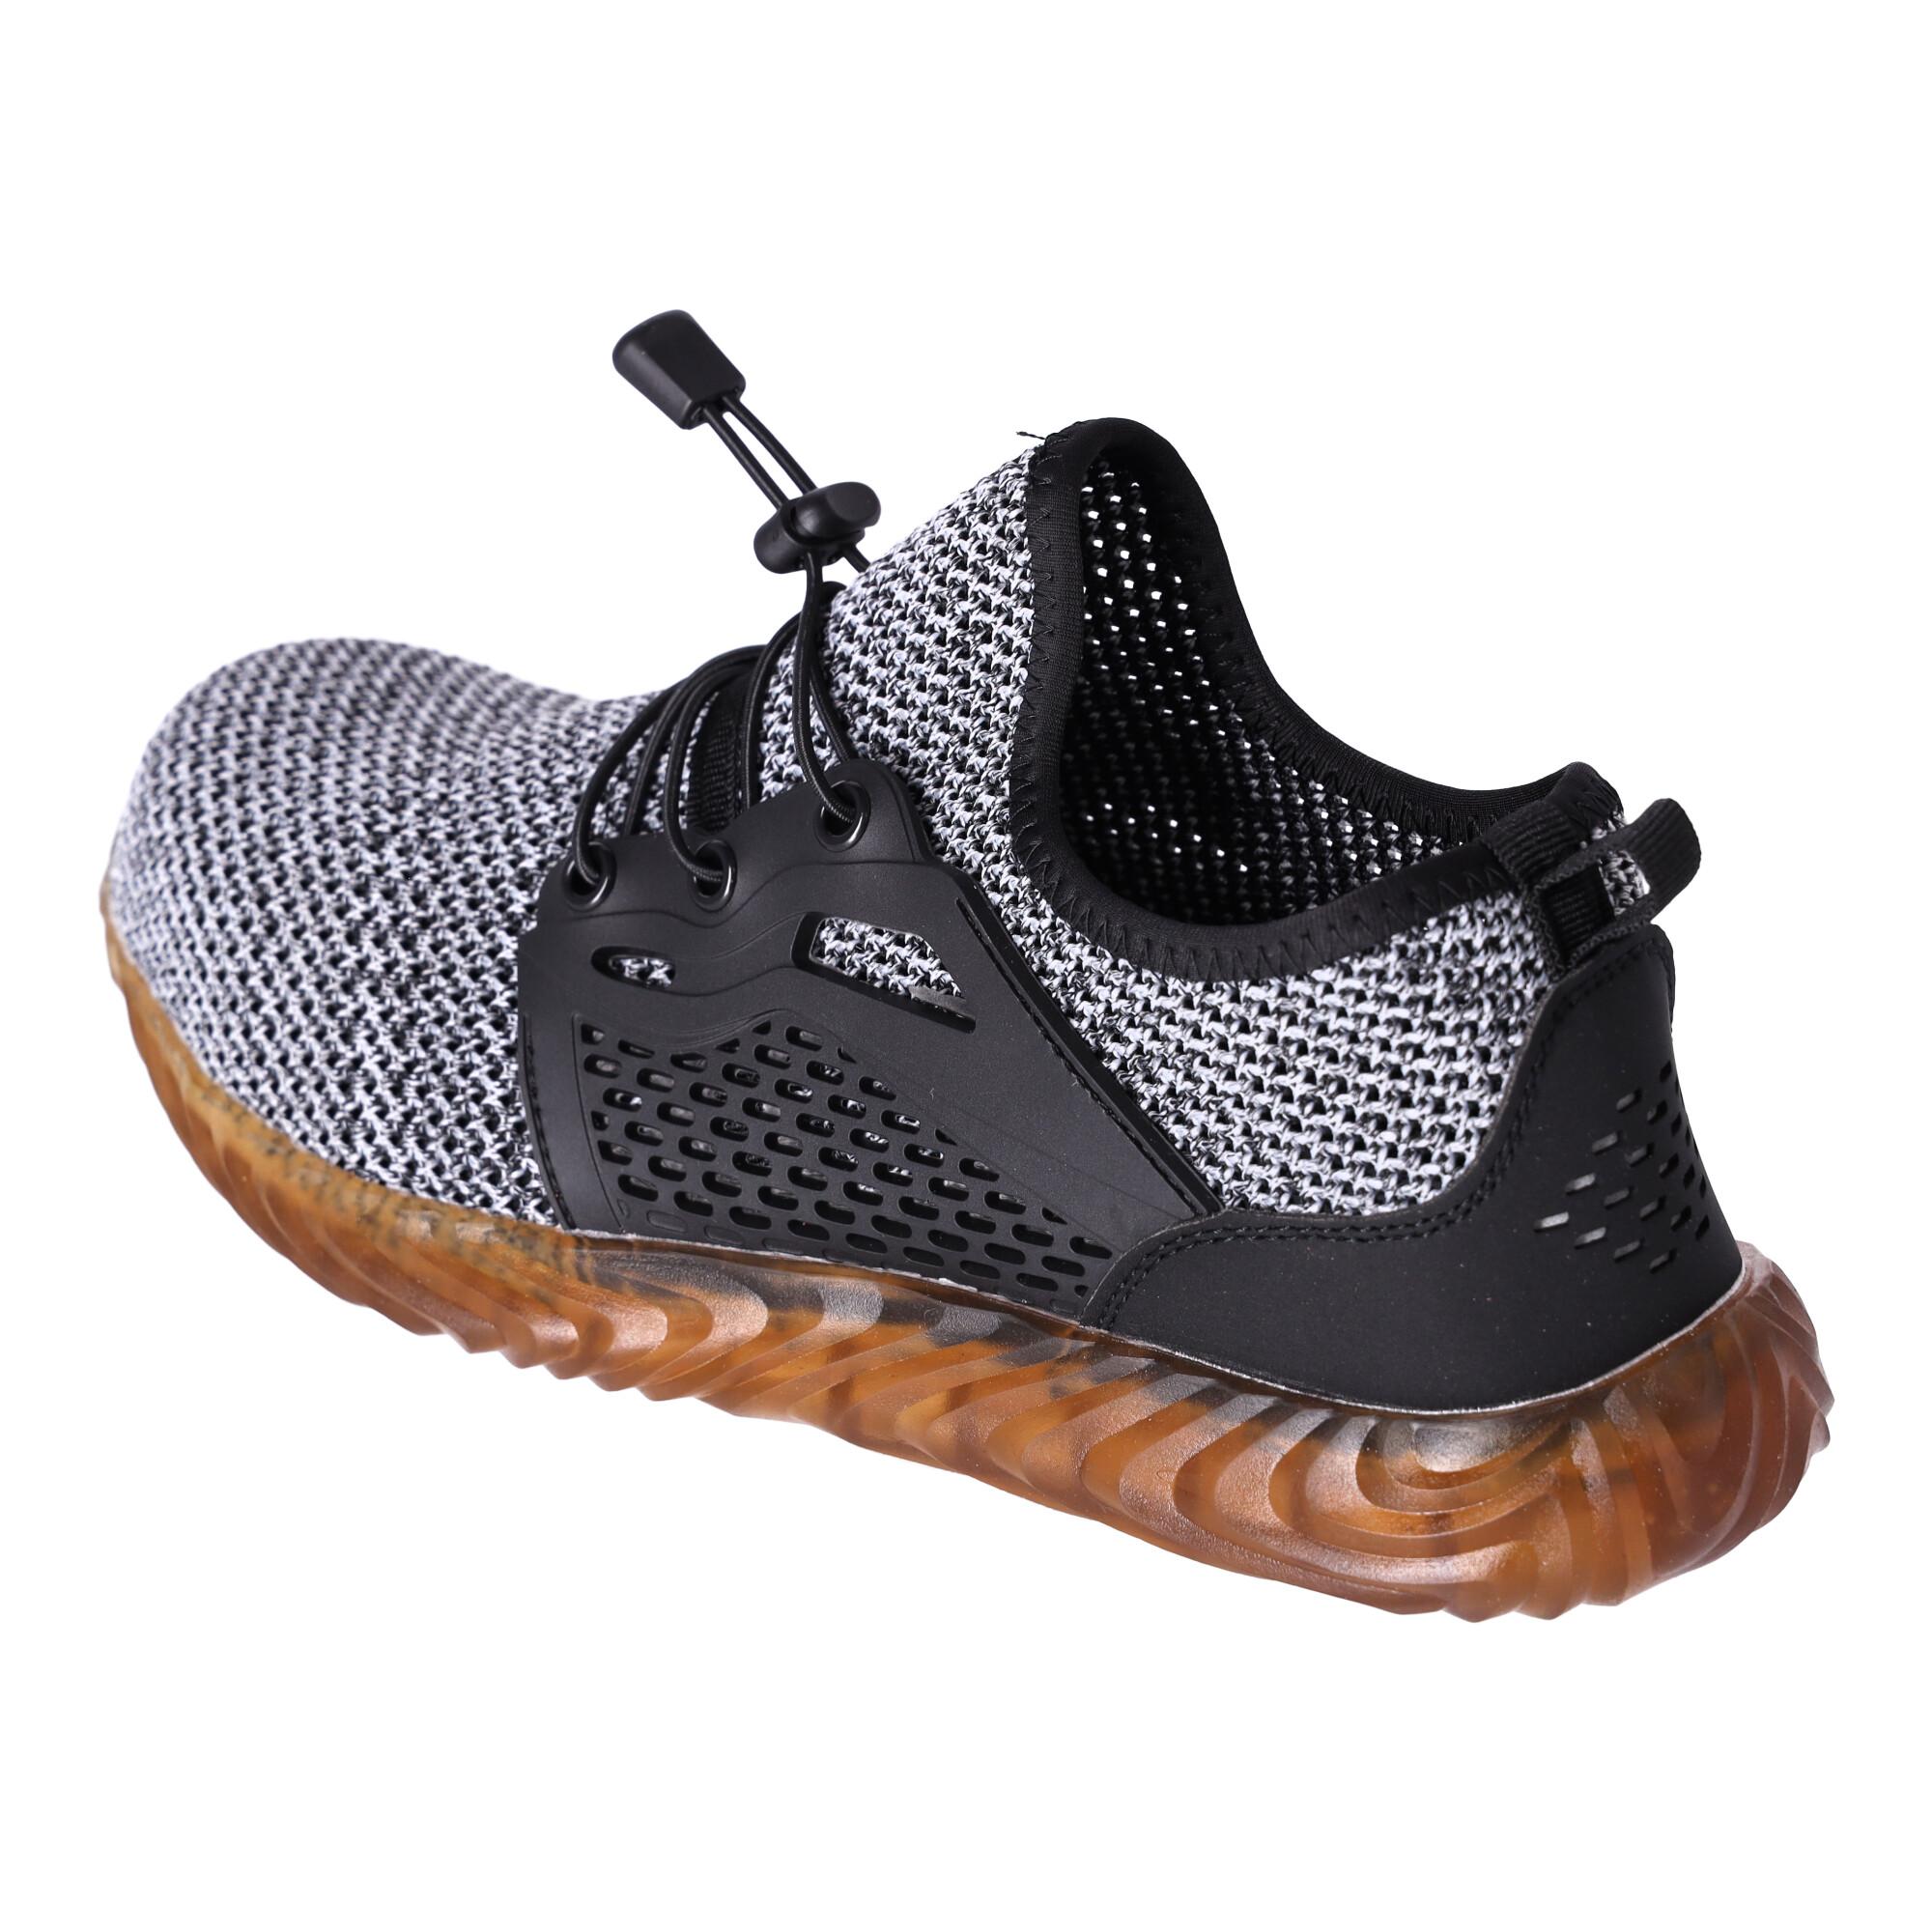 Work safety shoes Soft "44" - gray